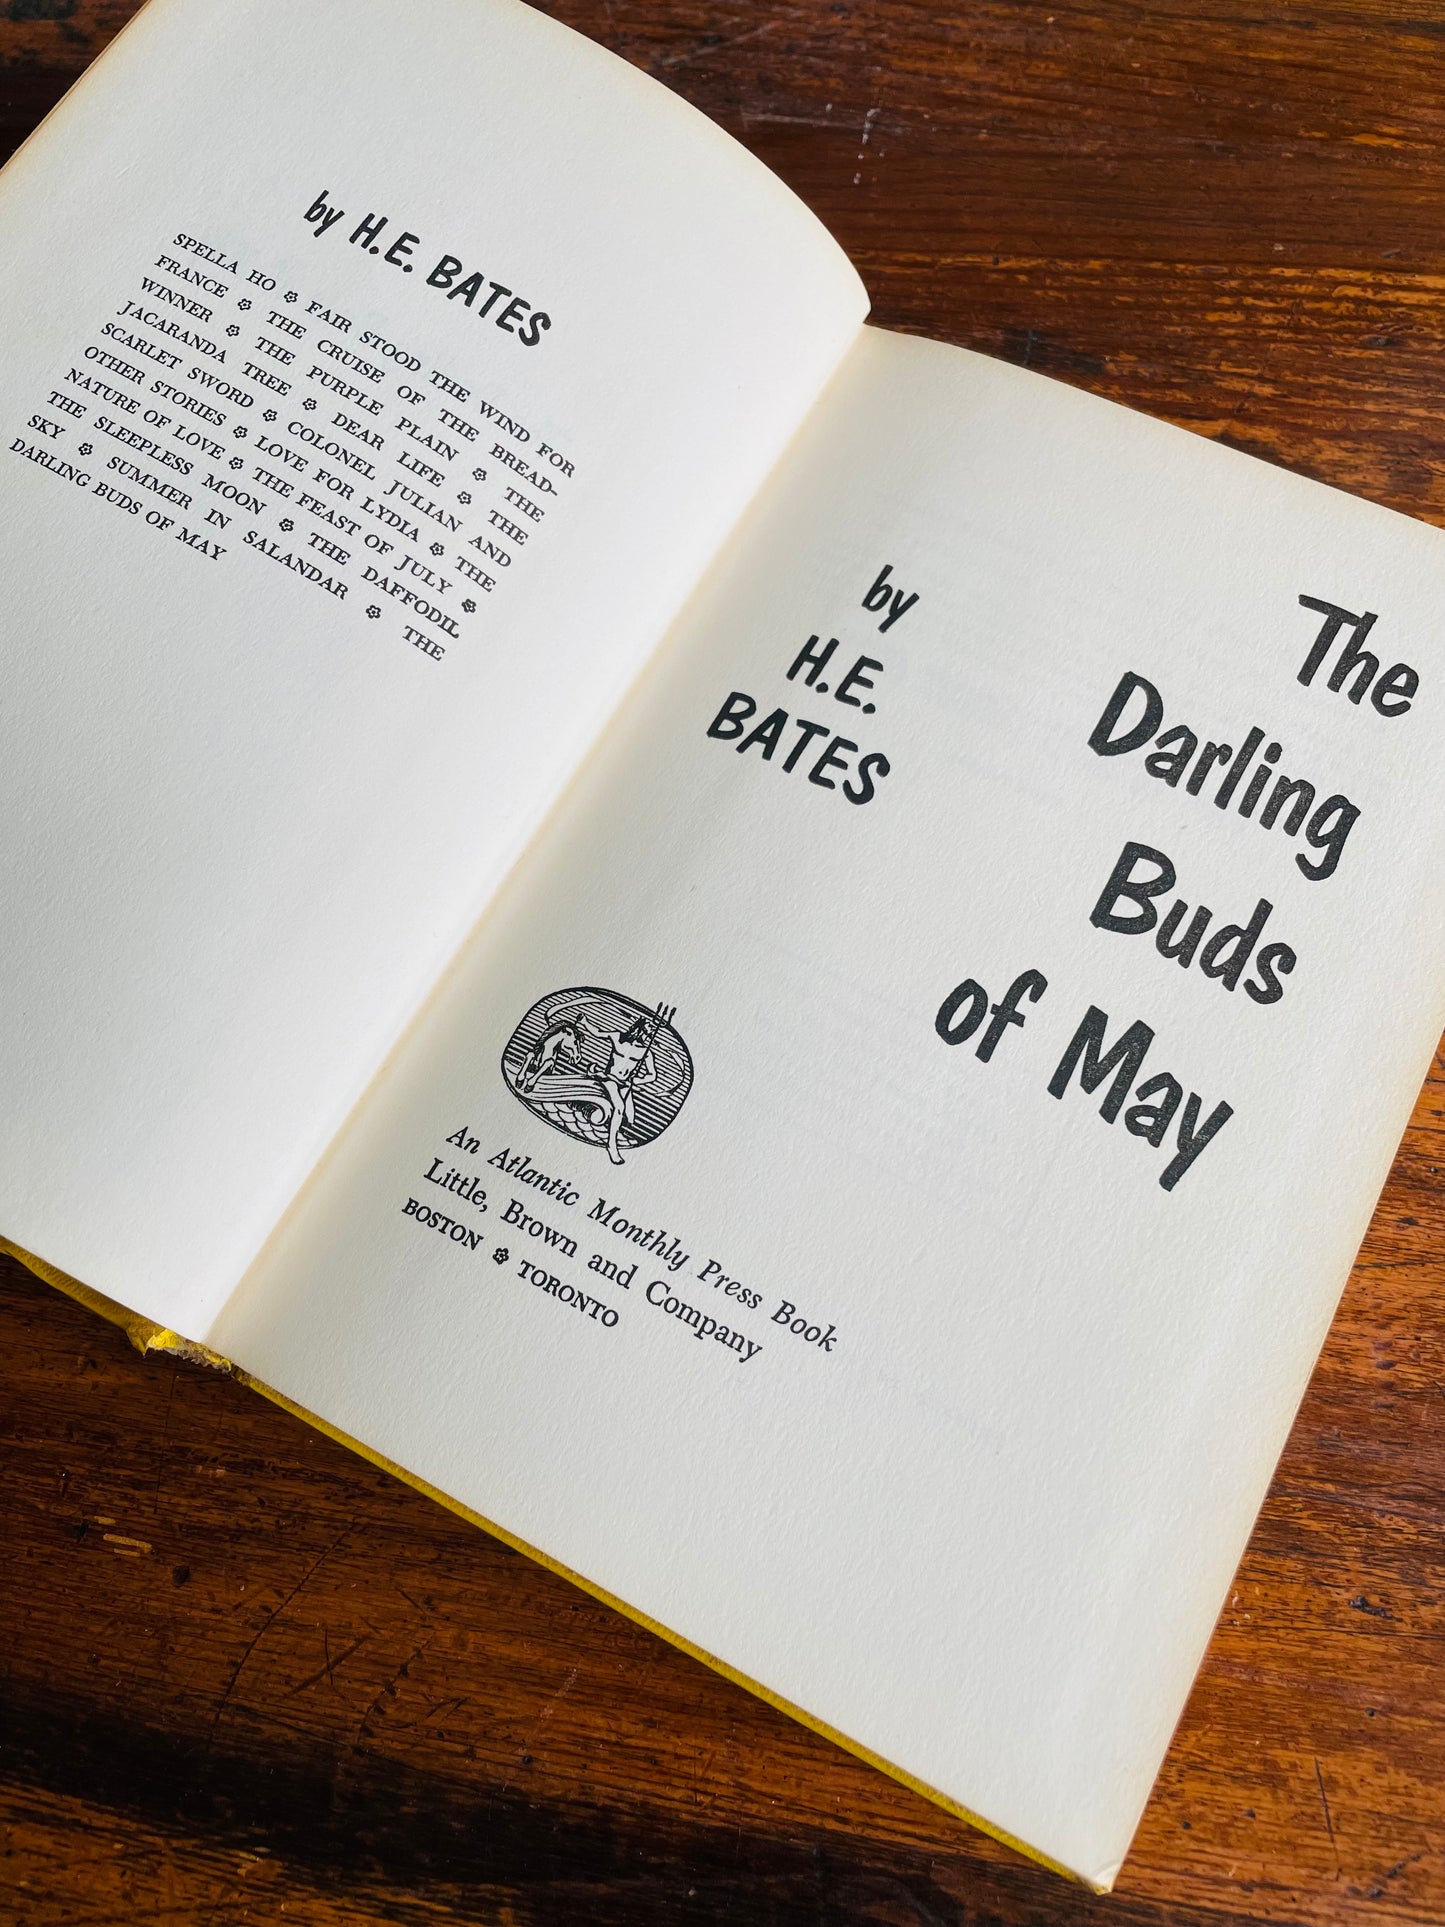 The Darling Buds of May - H. E. Bates (1958) - Vintage Book